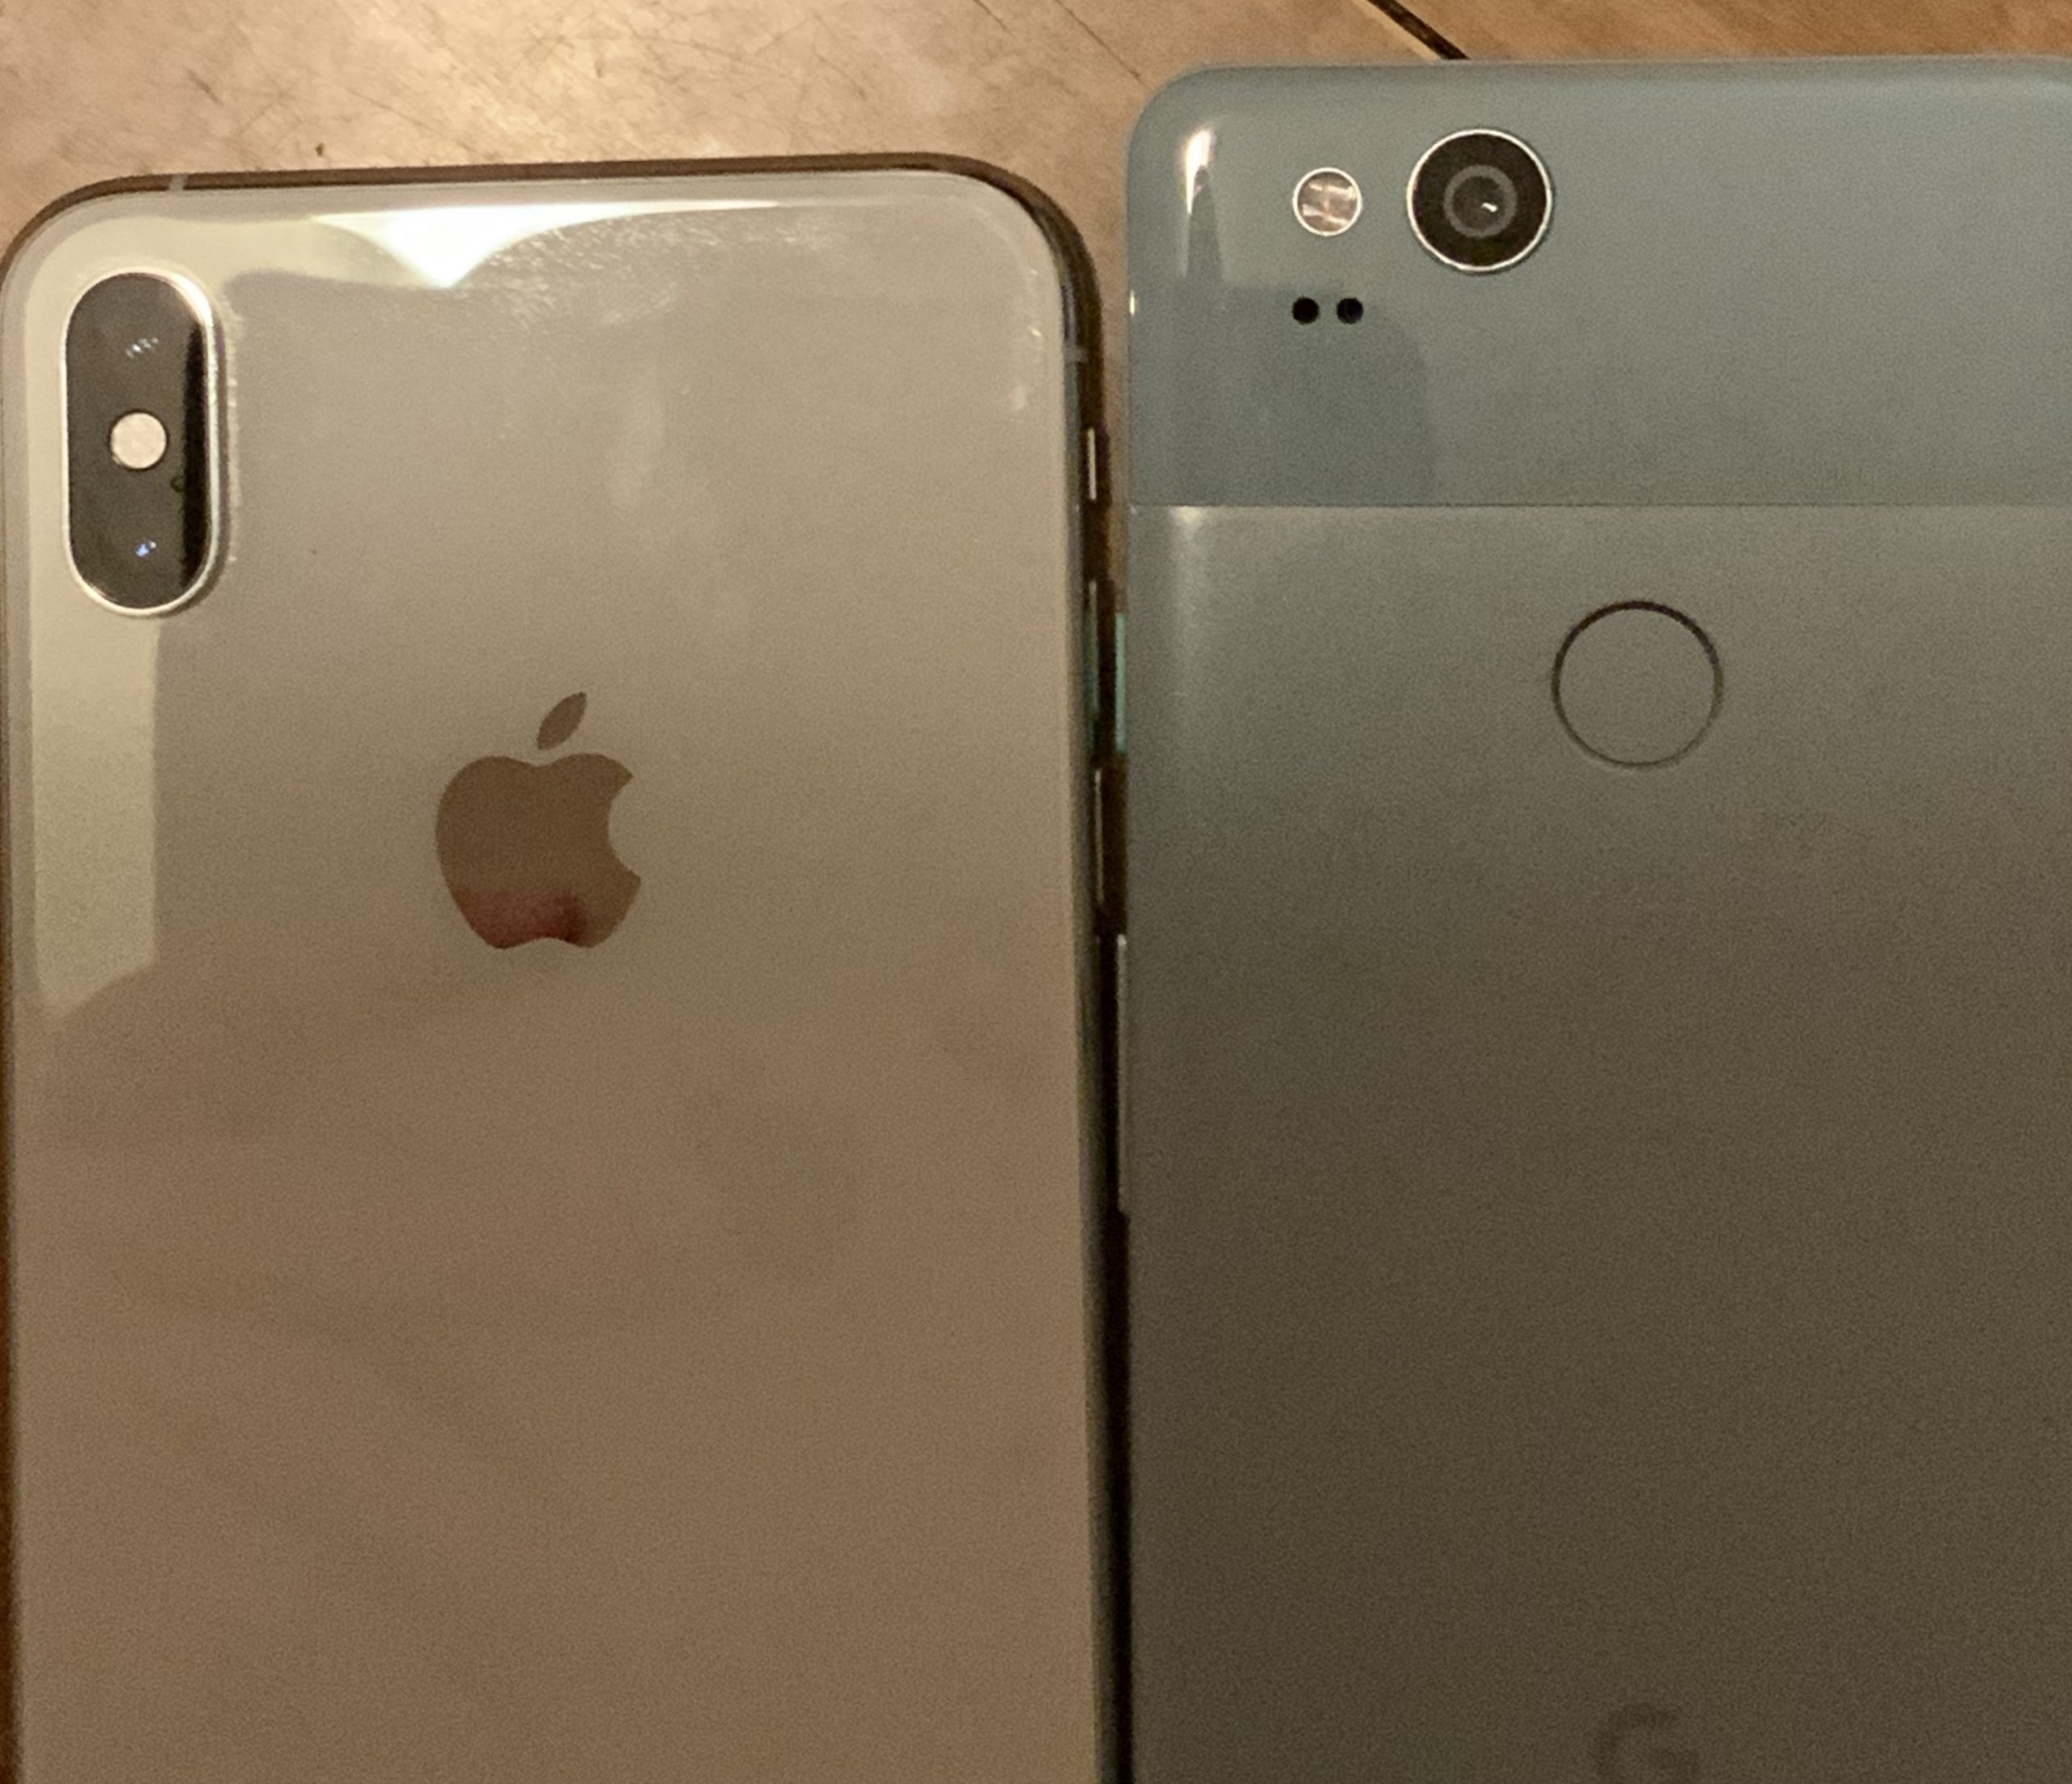 Picture of iPhone XS Max and Pixel 2 cameras.